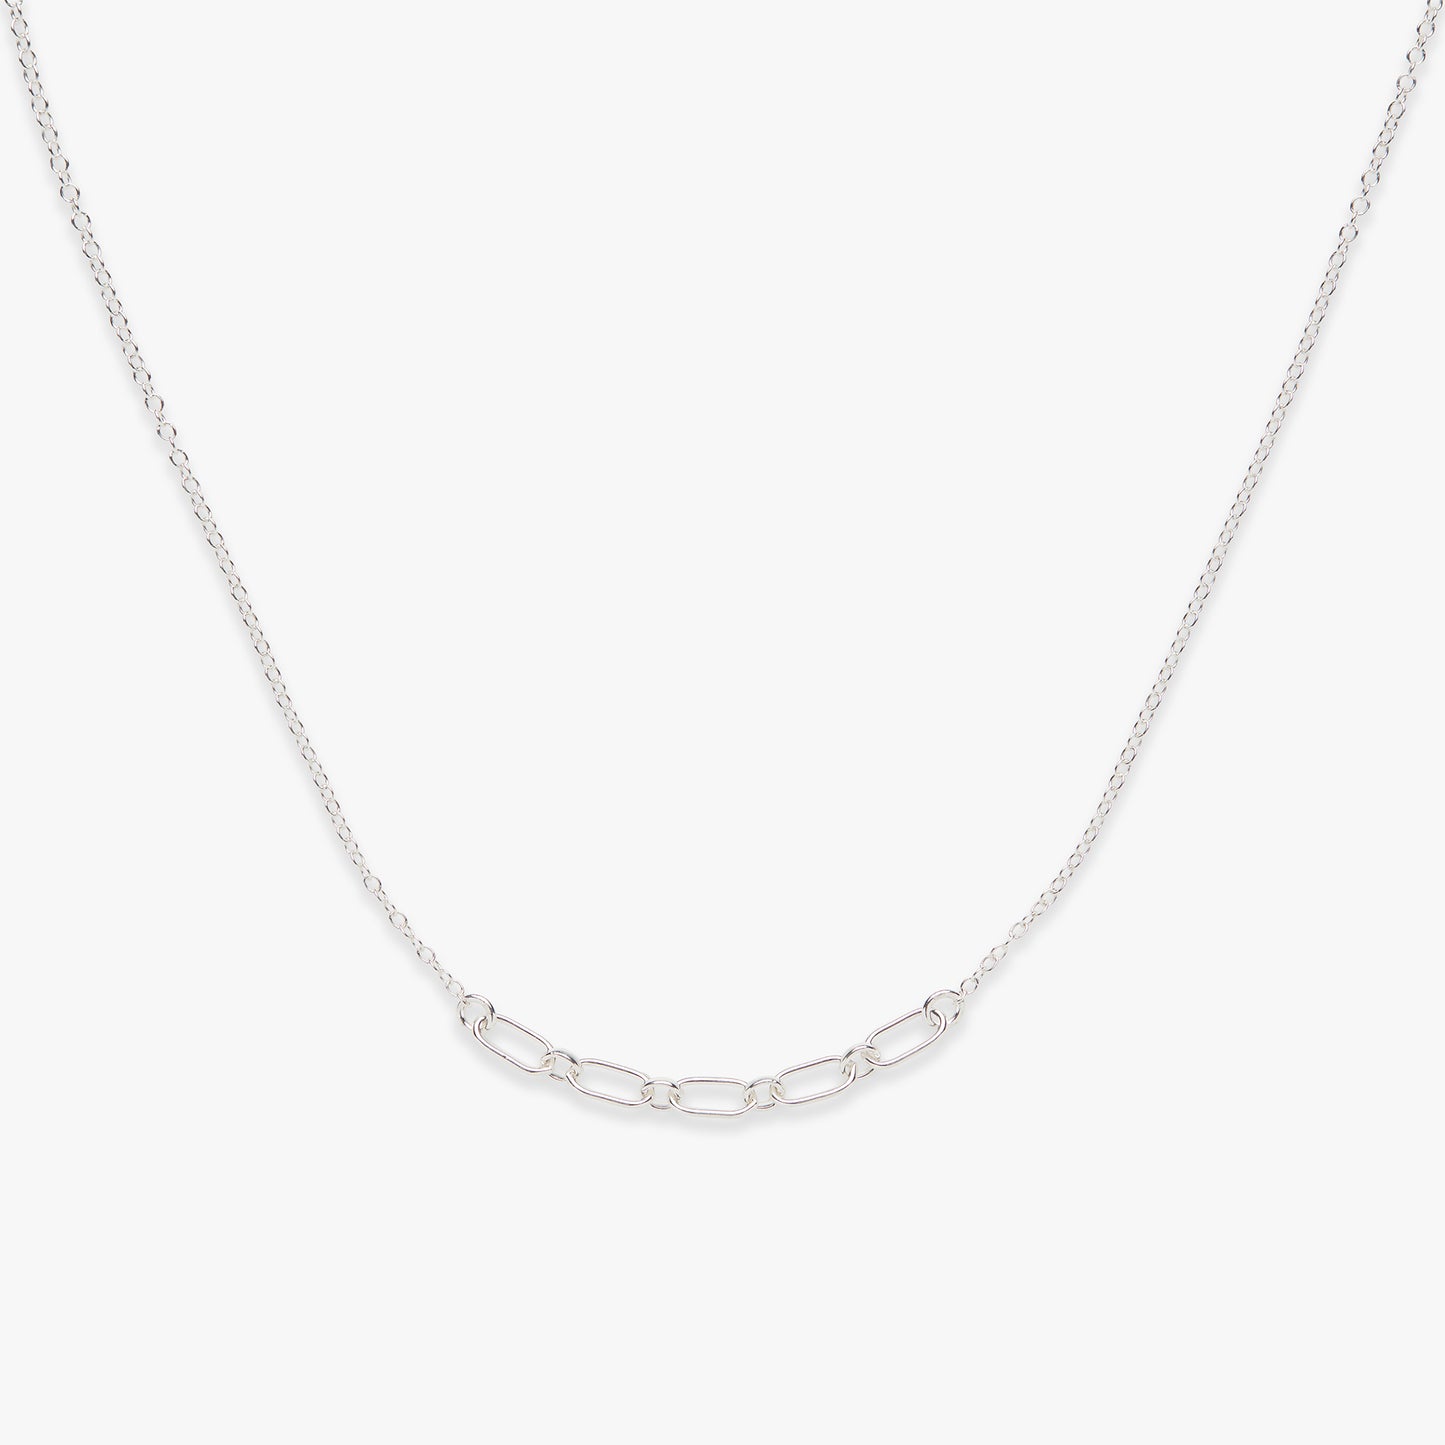 Oval links ketting zilver